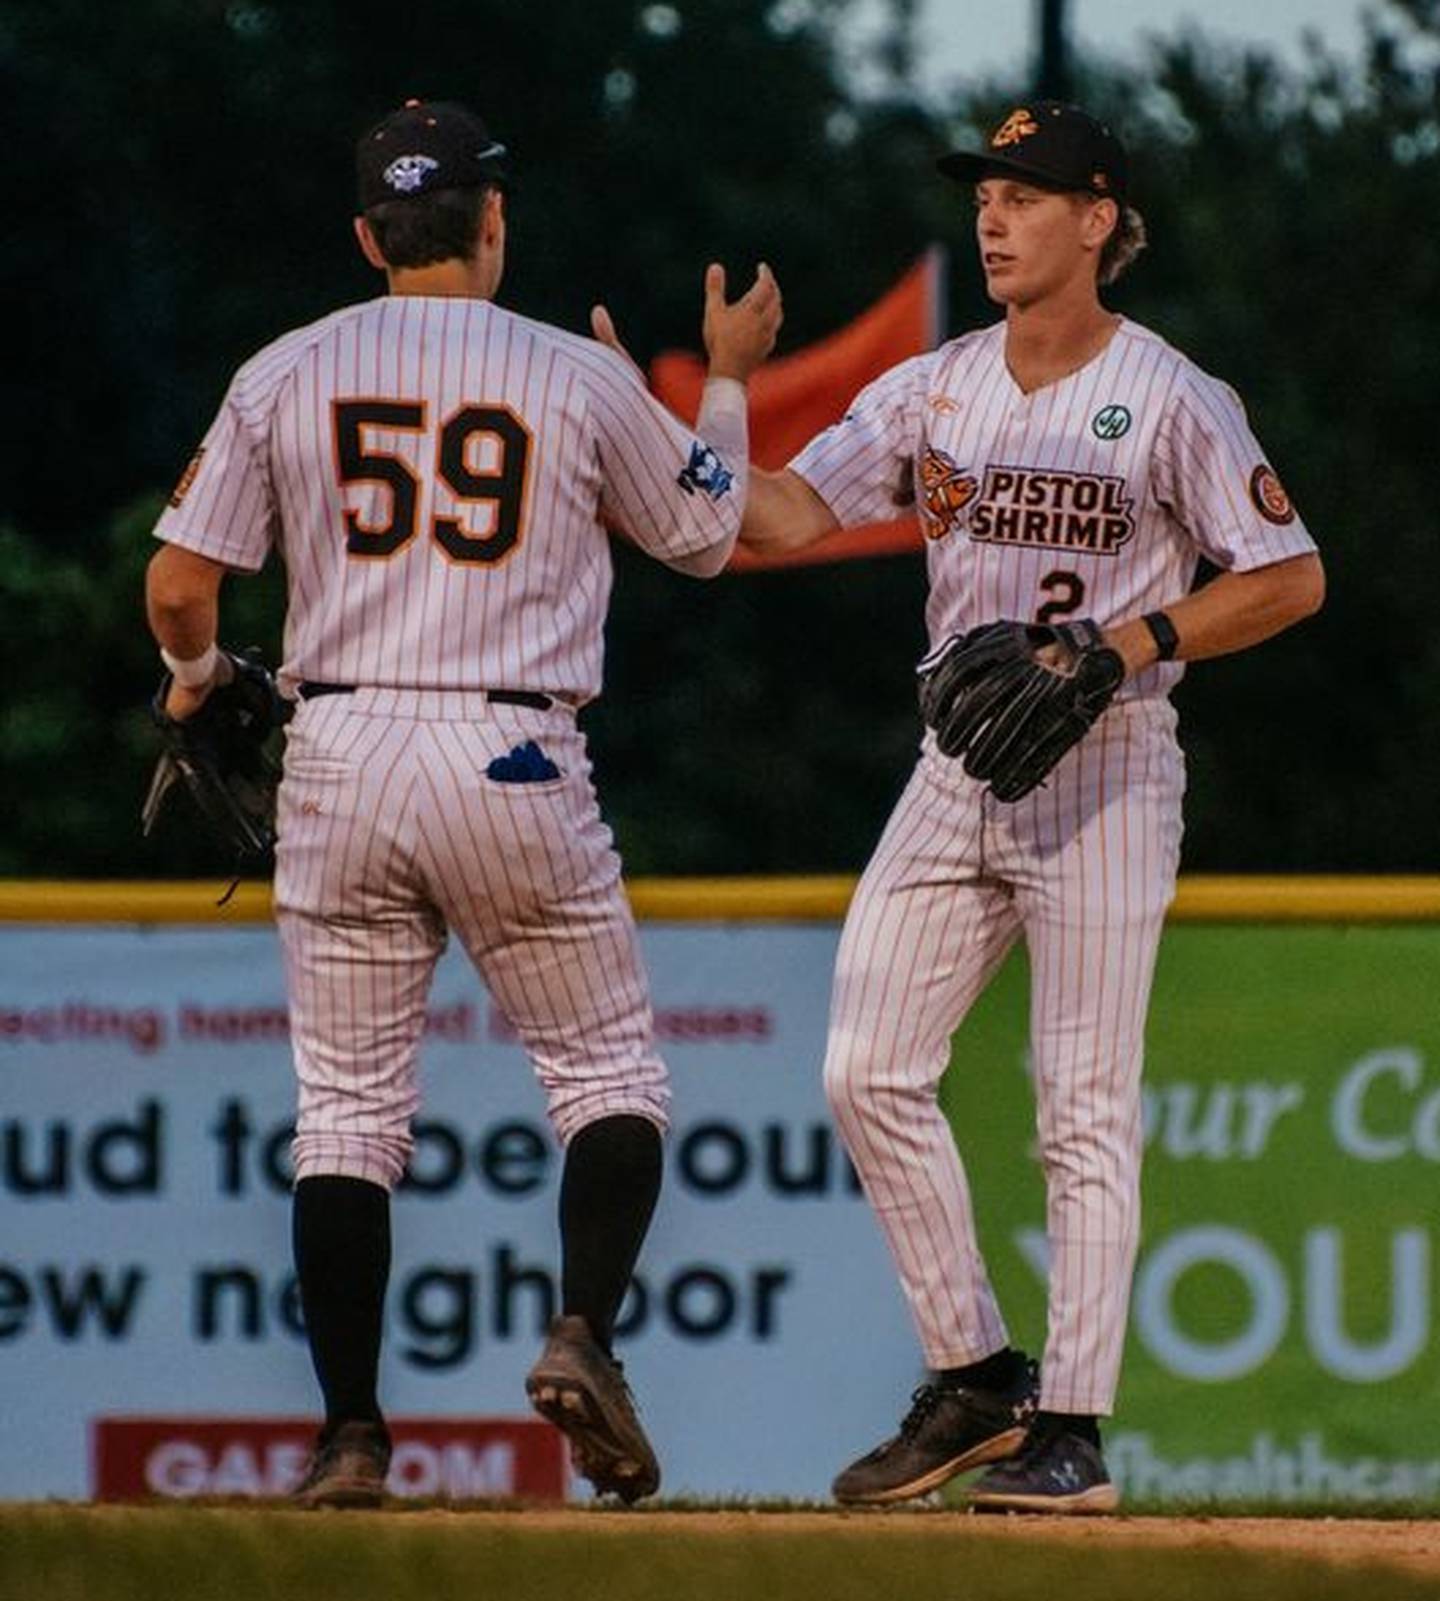 Chance Resetich (right) and Chris Esquivel high five during the Illinois Valley Pistol Shrimp's 8-5 victory over the Thrillville Thrillbillies on Tuesday, July 2, 2024 at Schweickert Stadium in Peru.